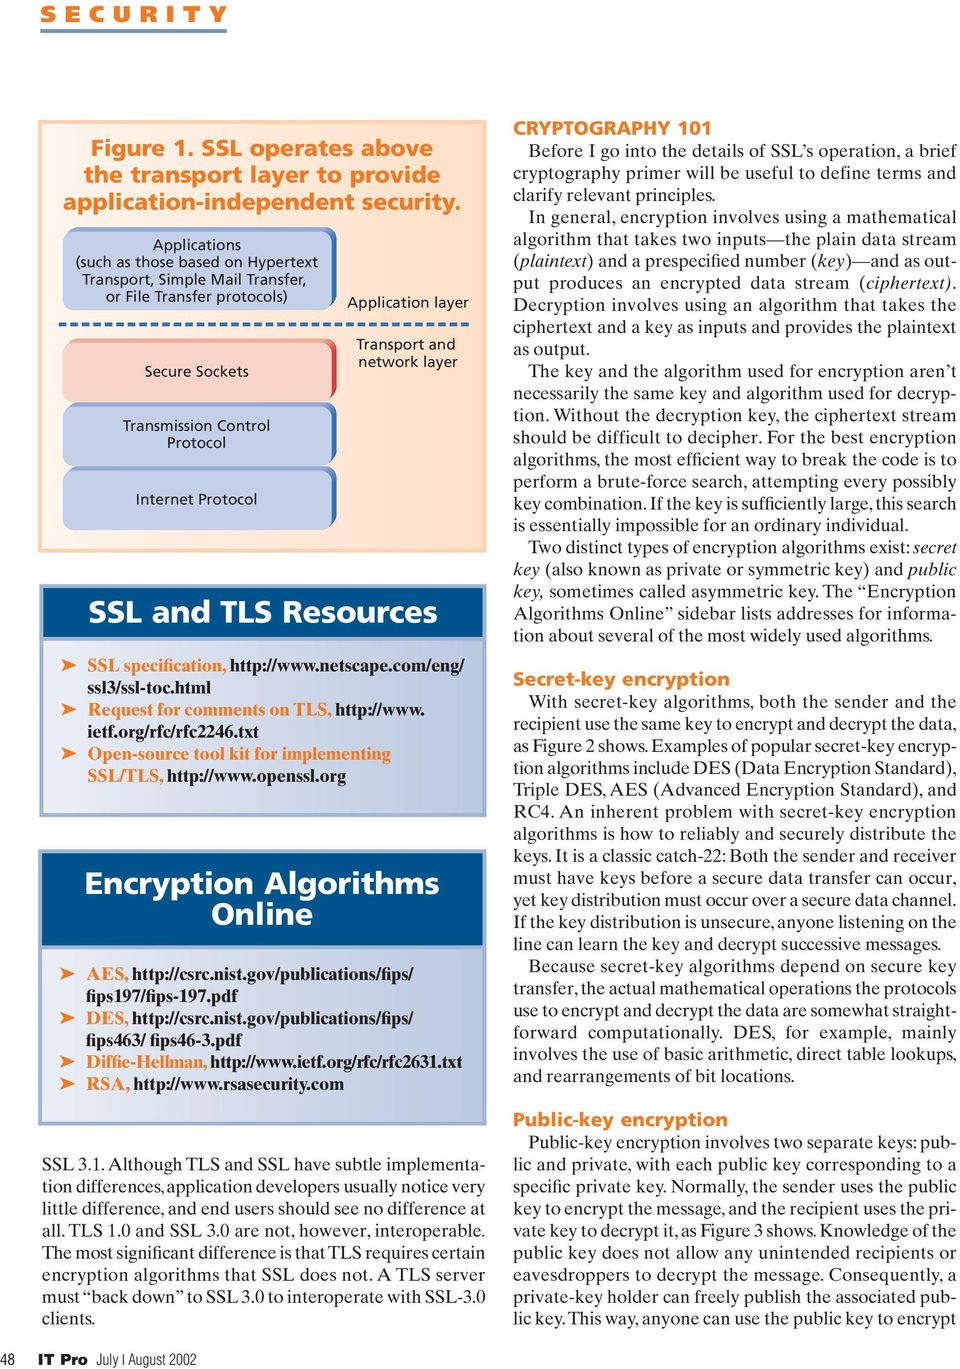 and network layer SSL and TLS Resources SSL specification, http://www.netscape.com/eng/ ssl3/ssl-toc.html Request for comments on TLS, http://www. ietf.org/rfc/rfc2246.